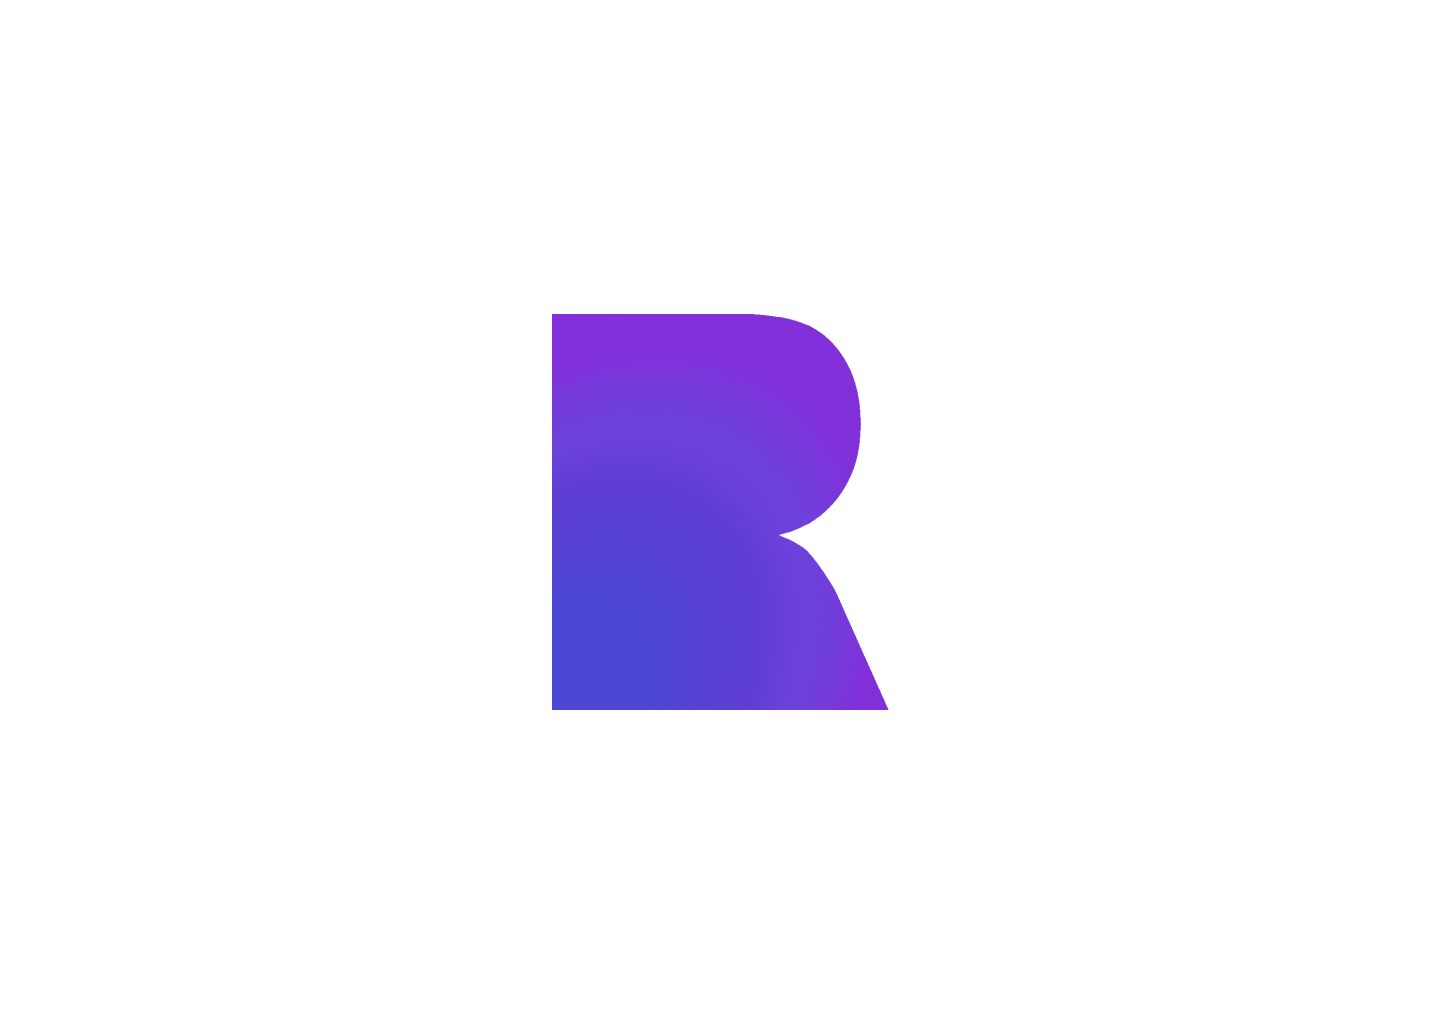 Roser Growth section hero image that shows the logo, a purple 'R'. Roser Growth is a Berlin-based growth consultancy